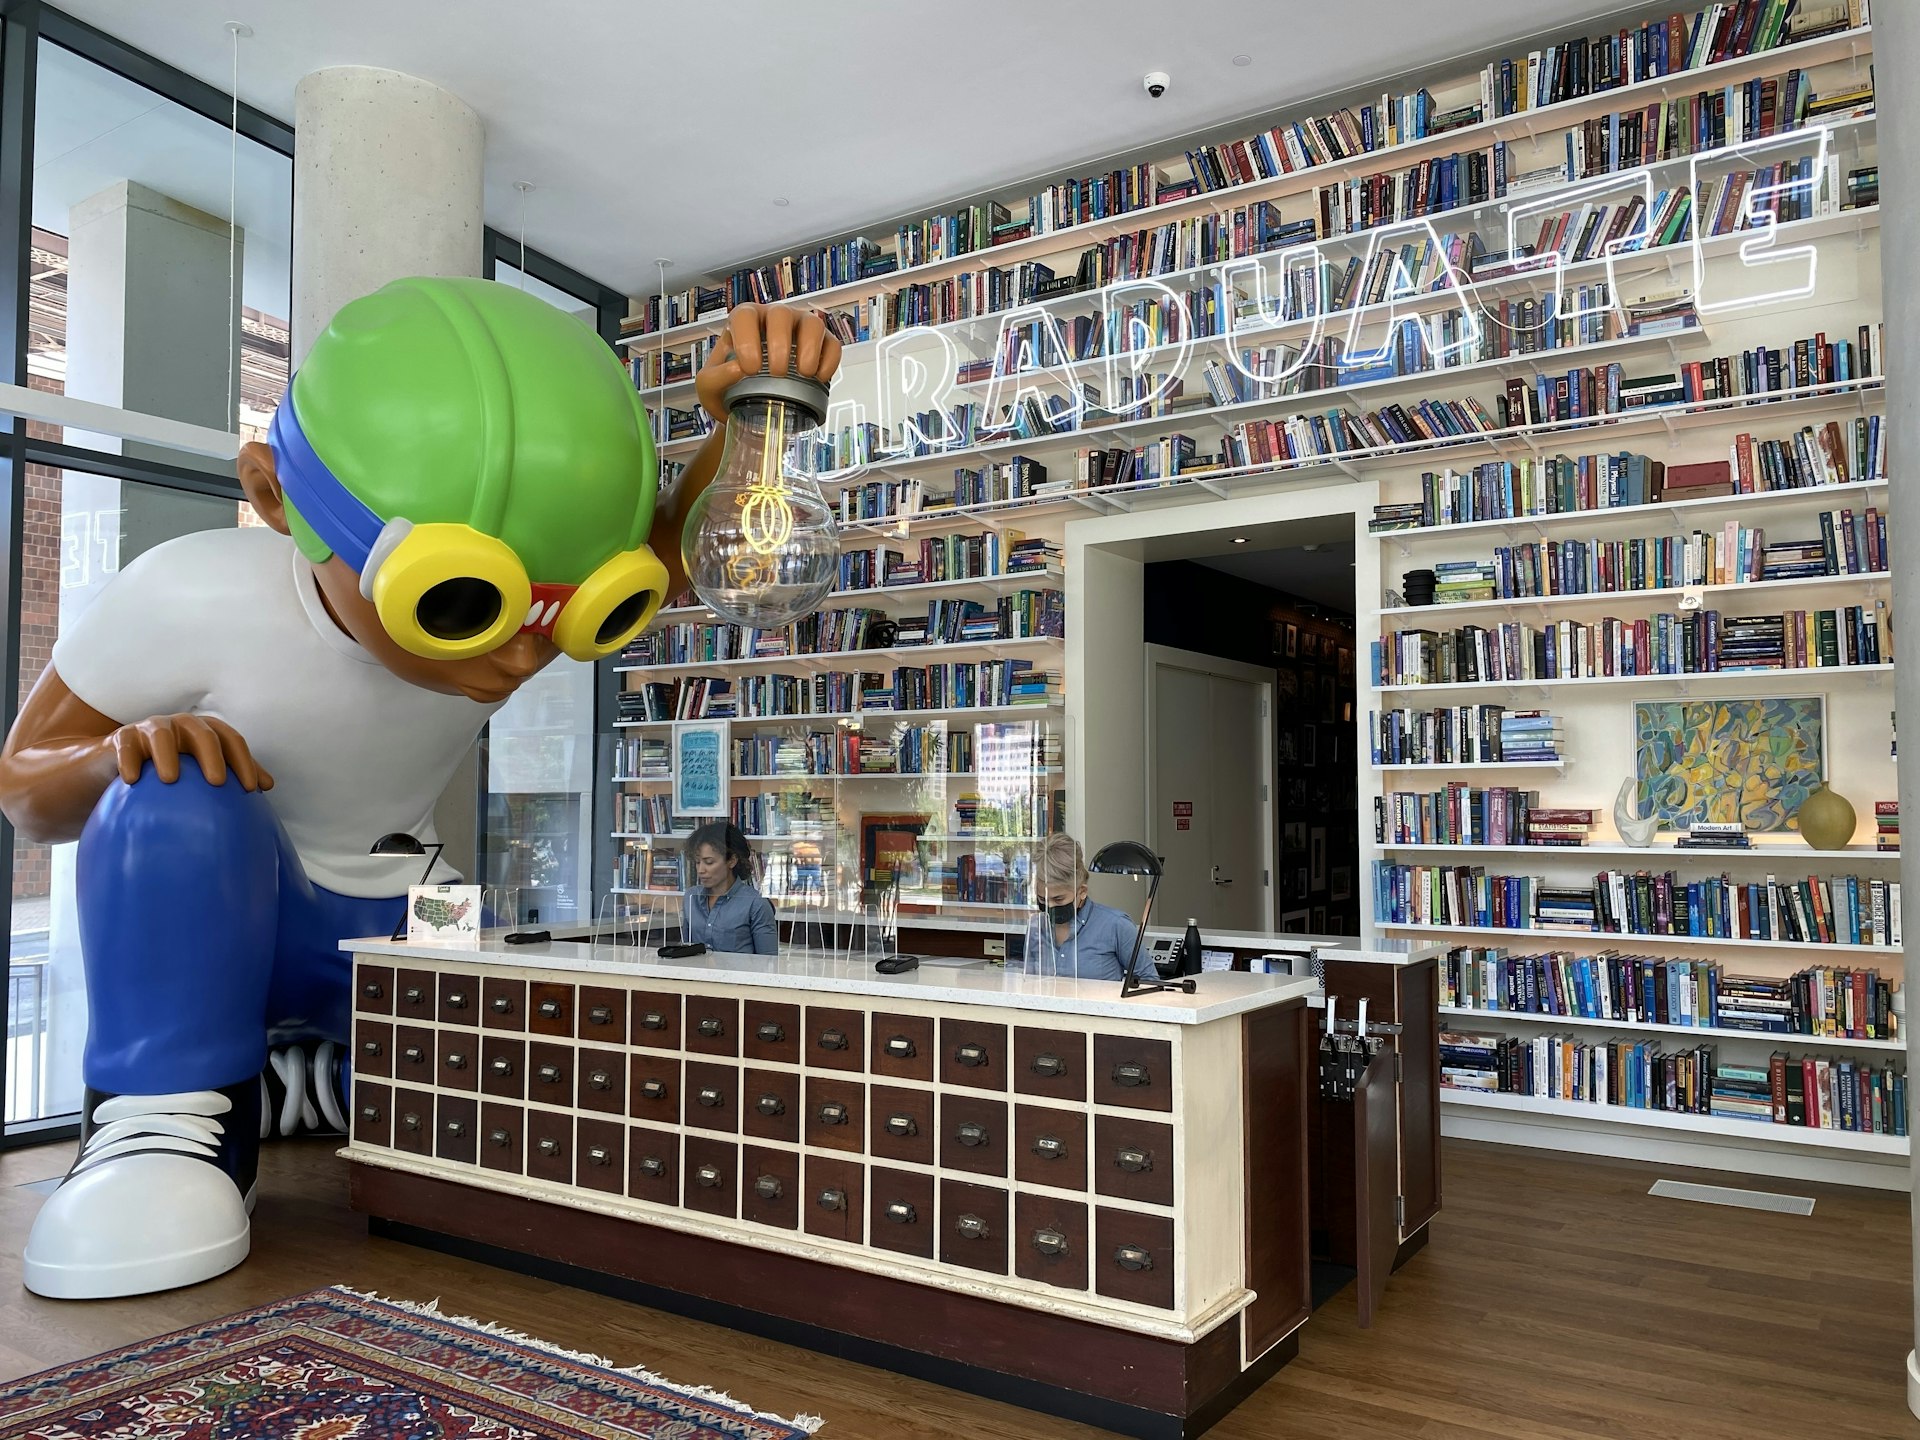 A hotel lobby with an art installation and books on the wall